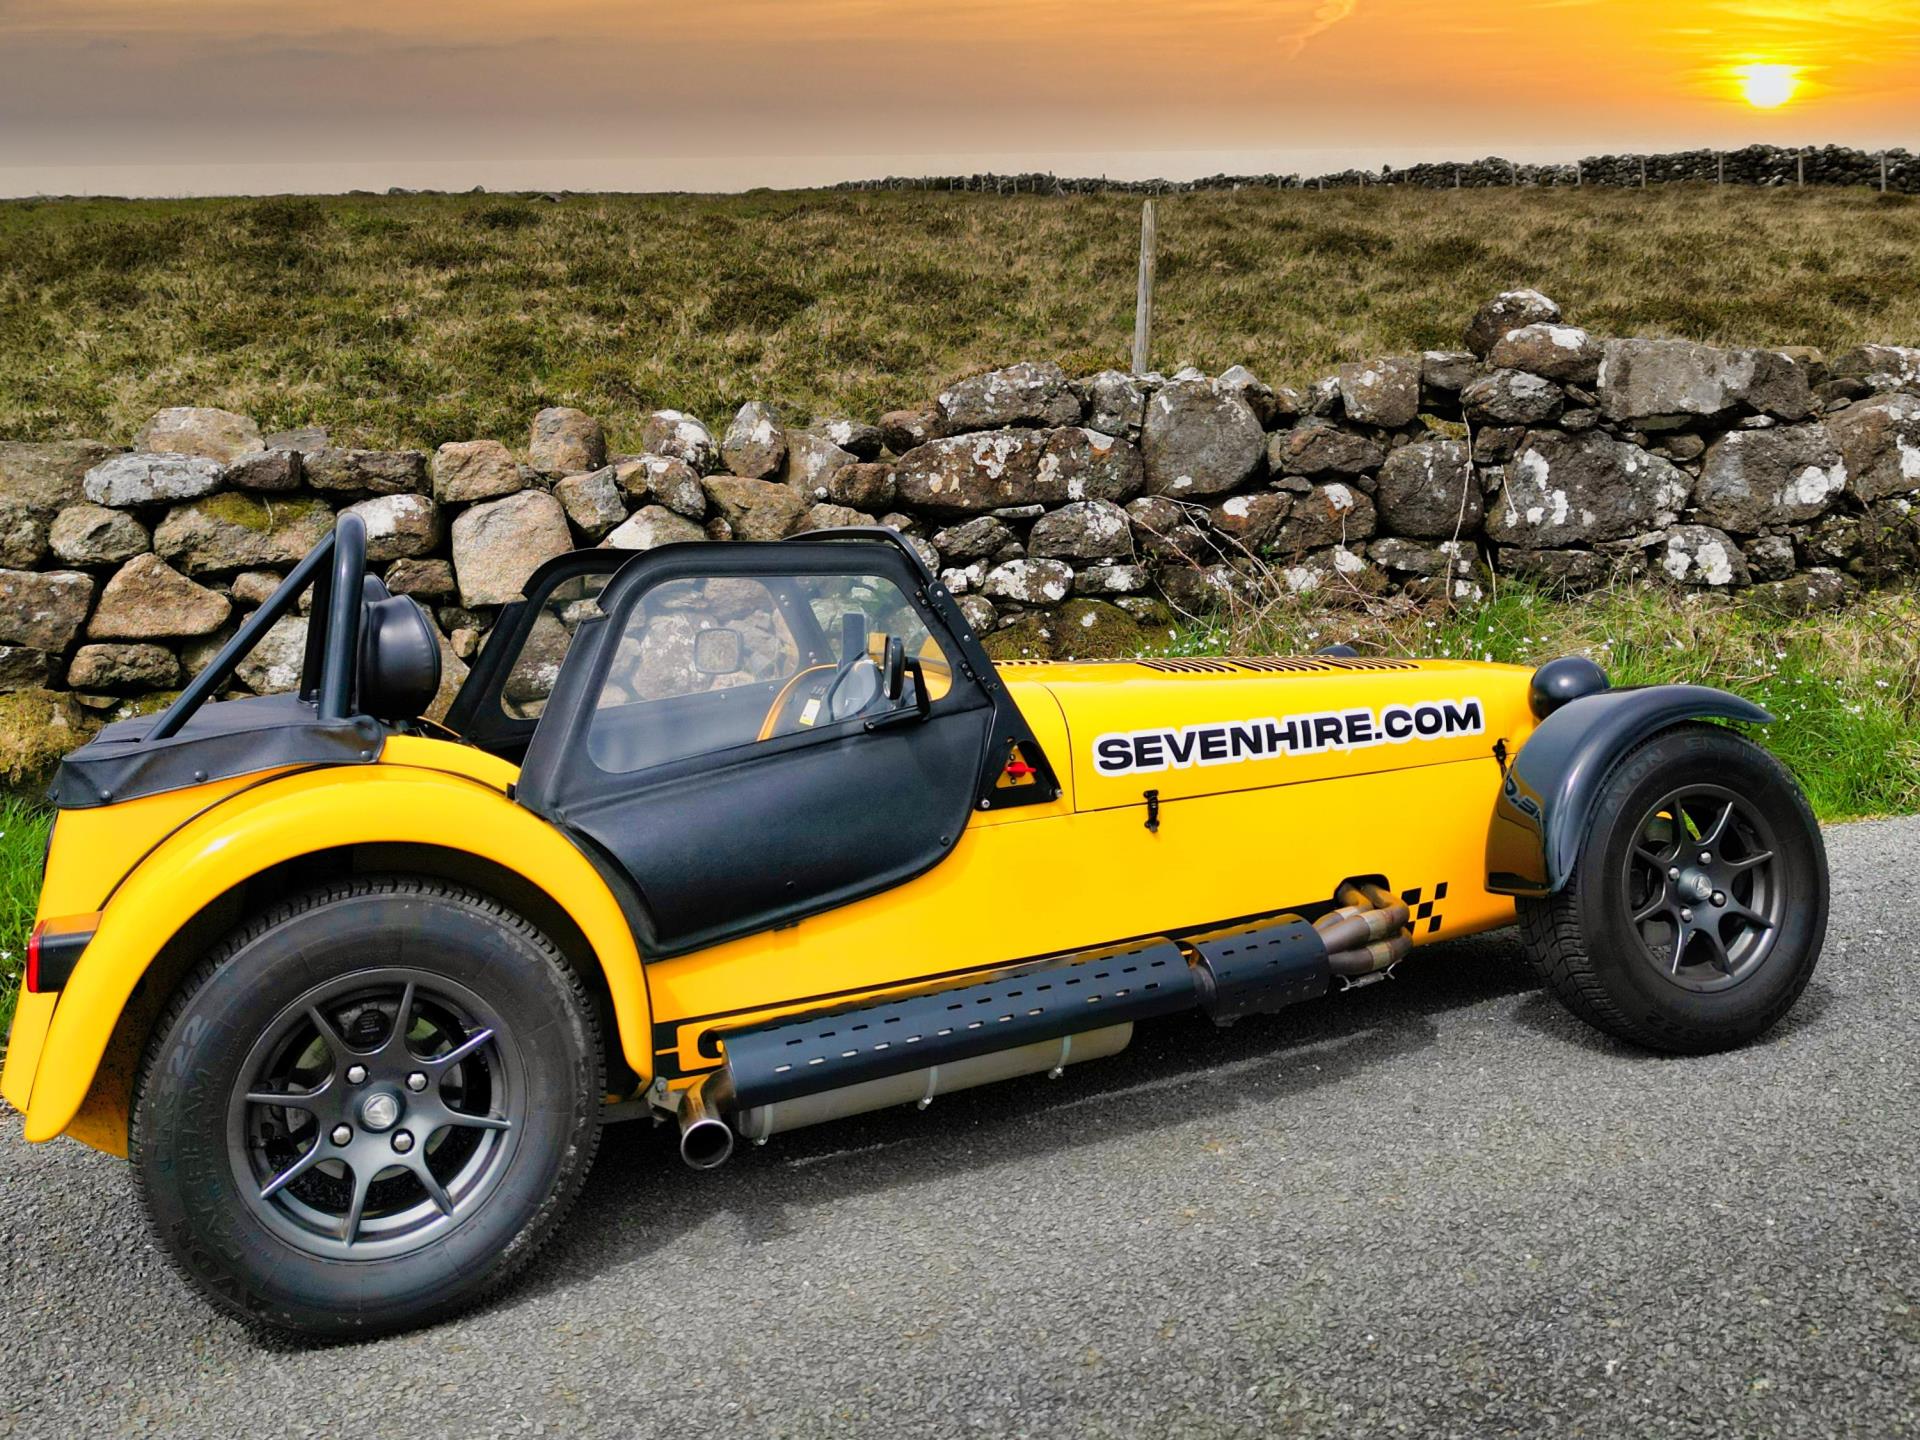 Caterham 7 Side View